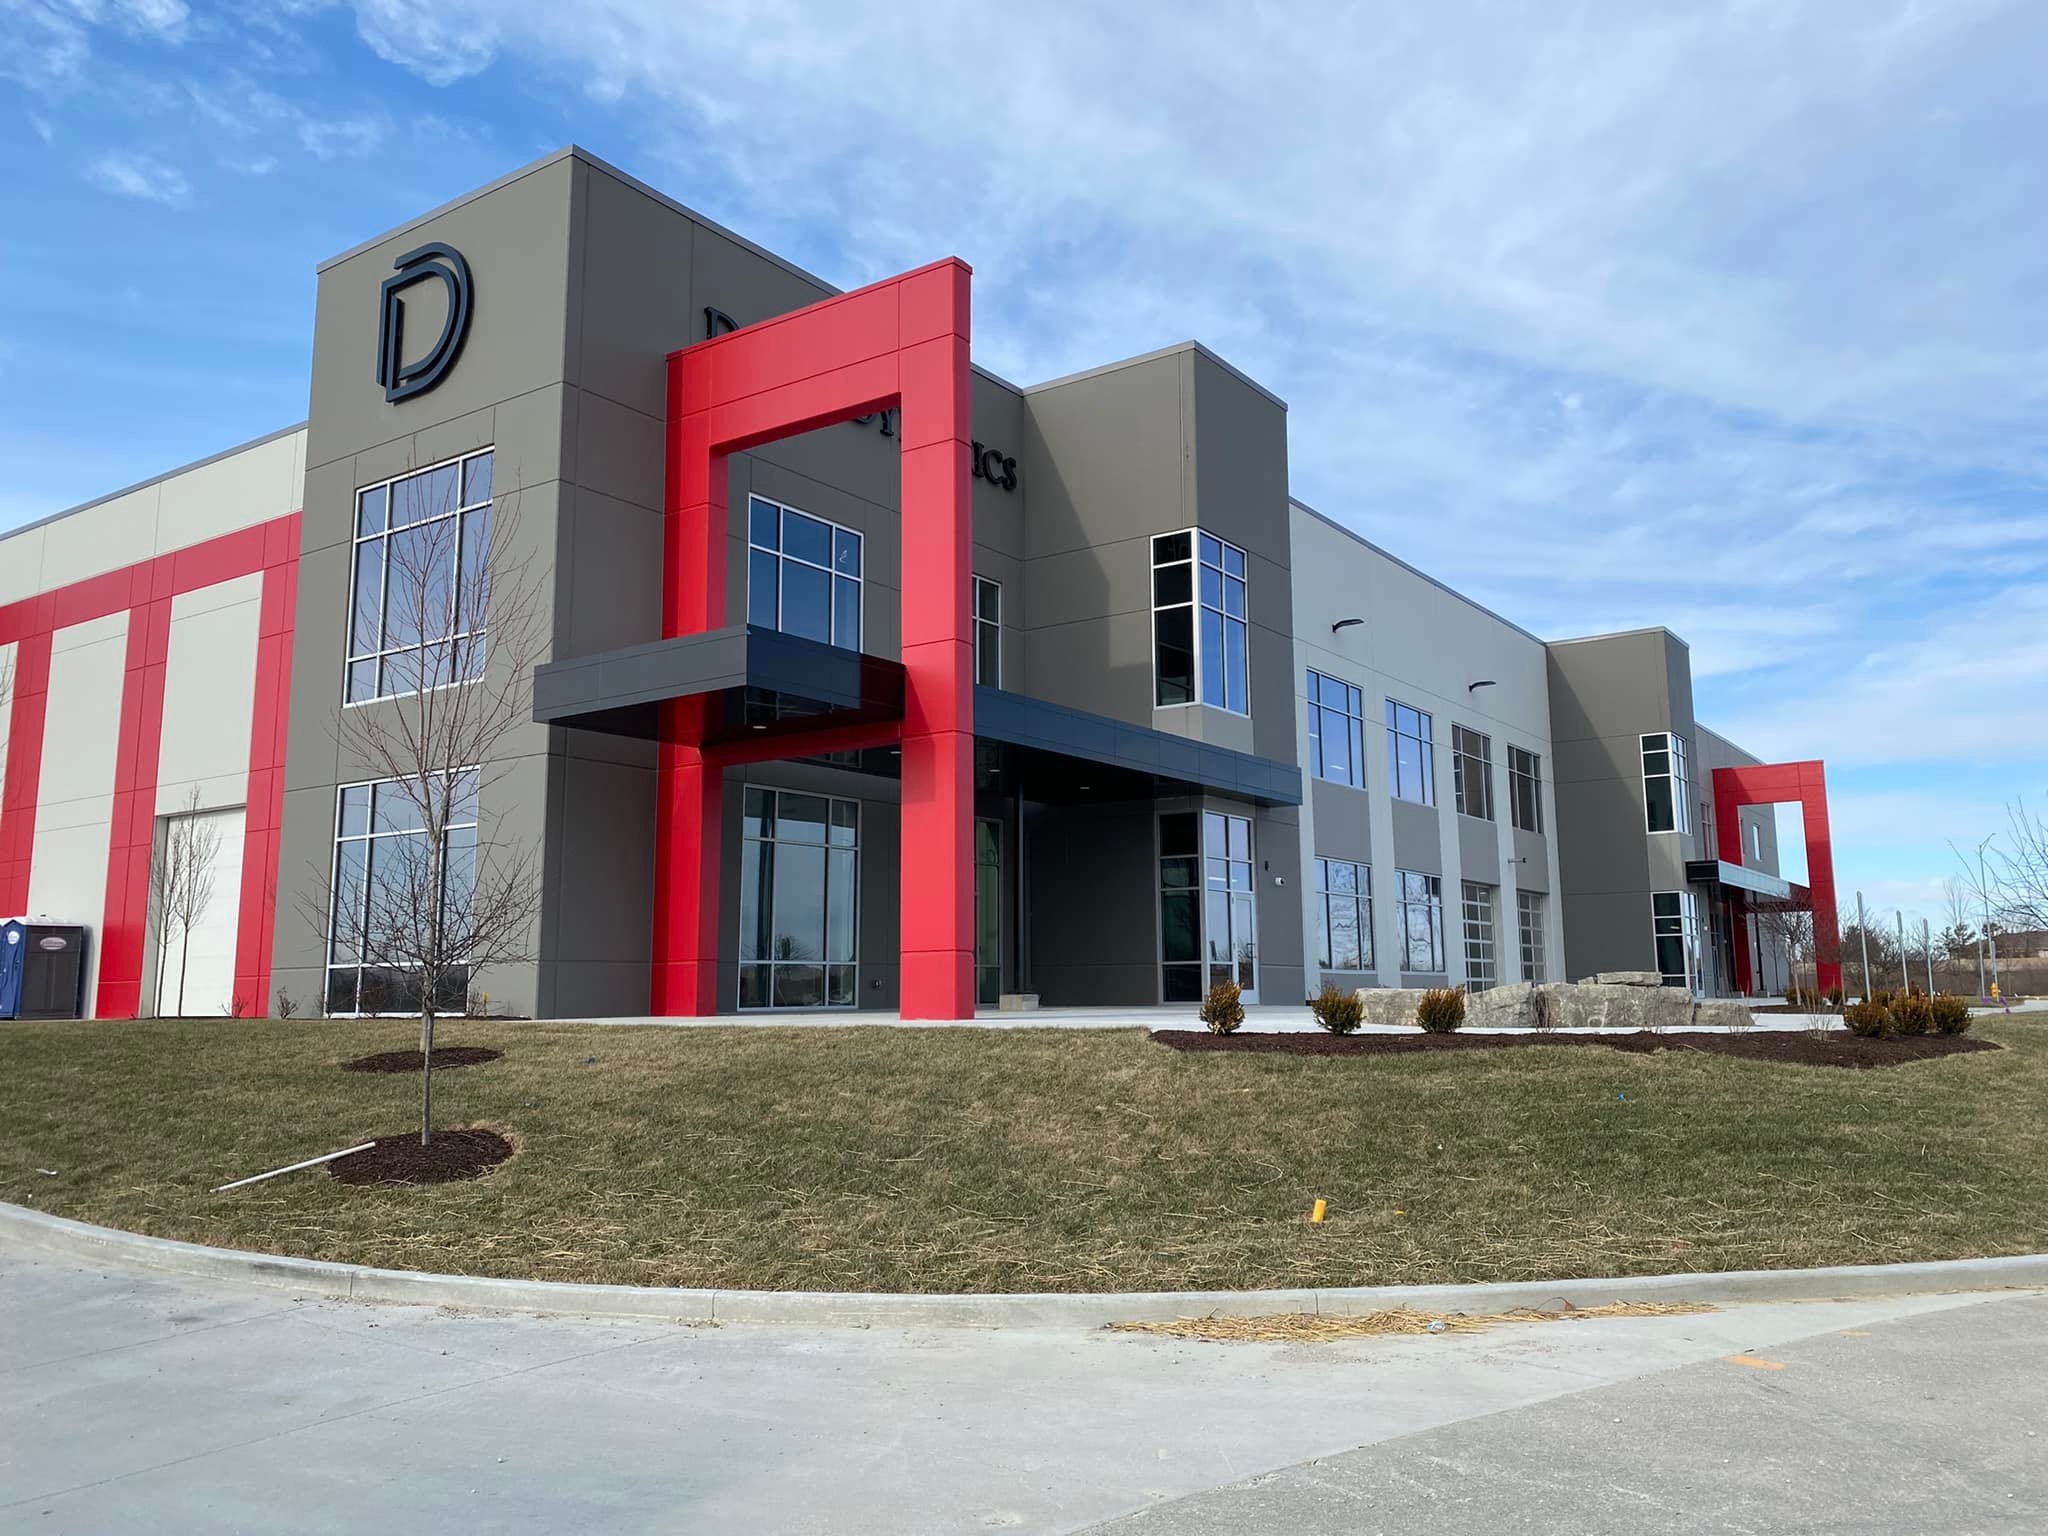 Exterior of a building with a Double D logo on the side and red accent arches.